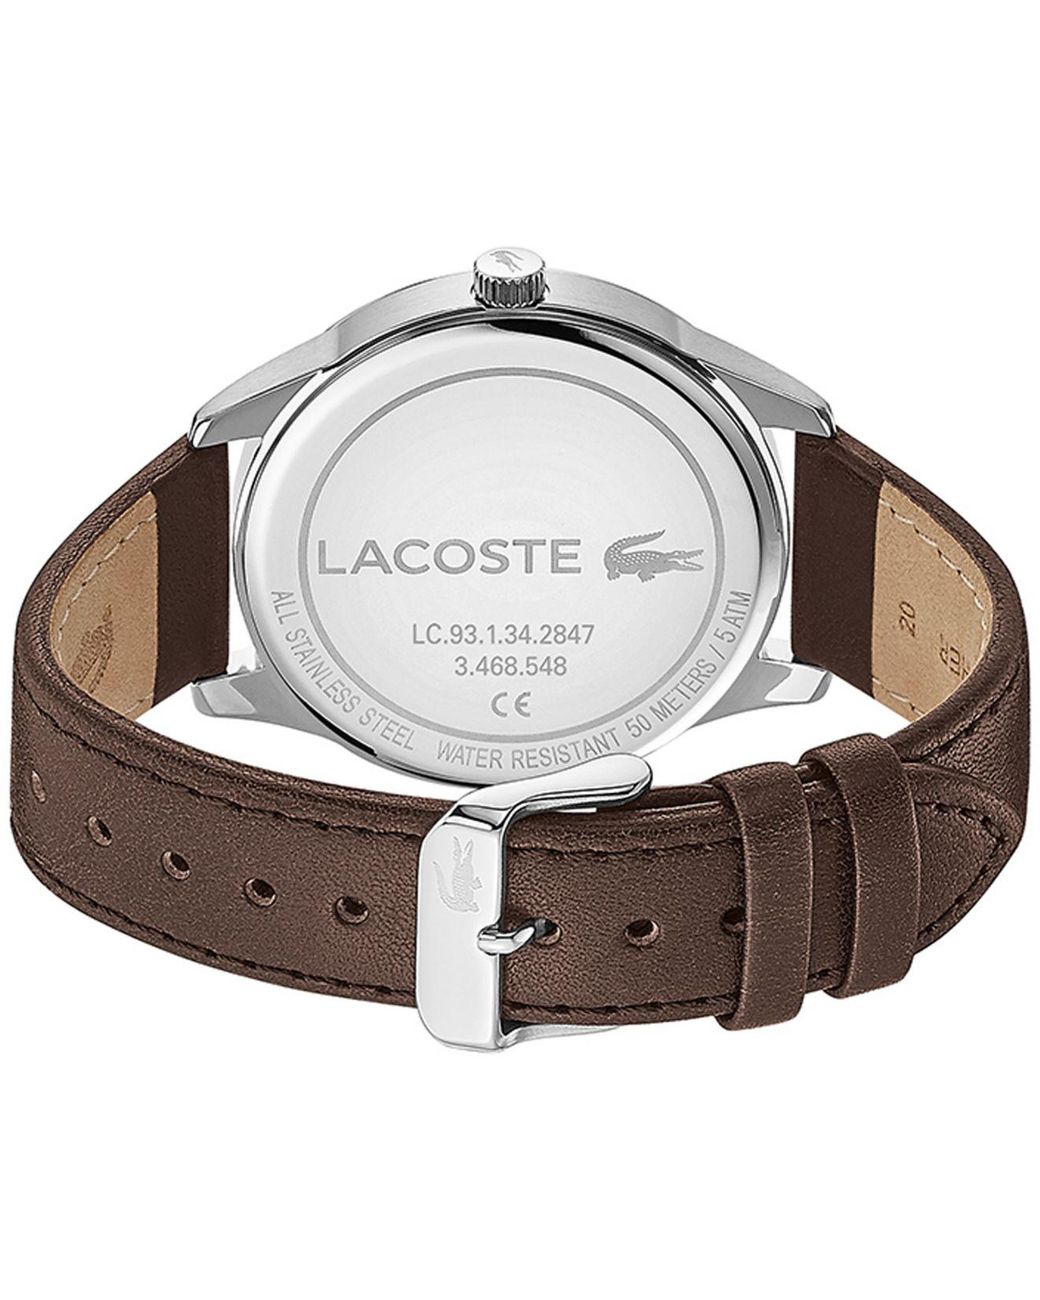 lacoste all stainless steel water resistant 5 atm